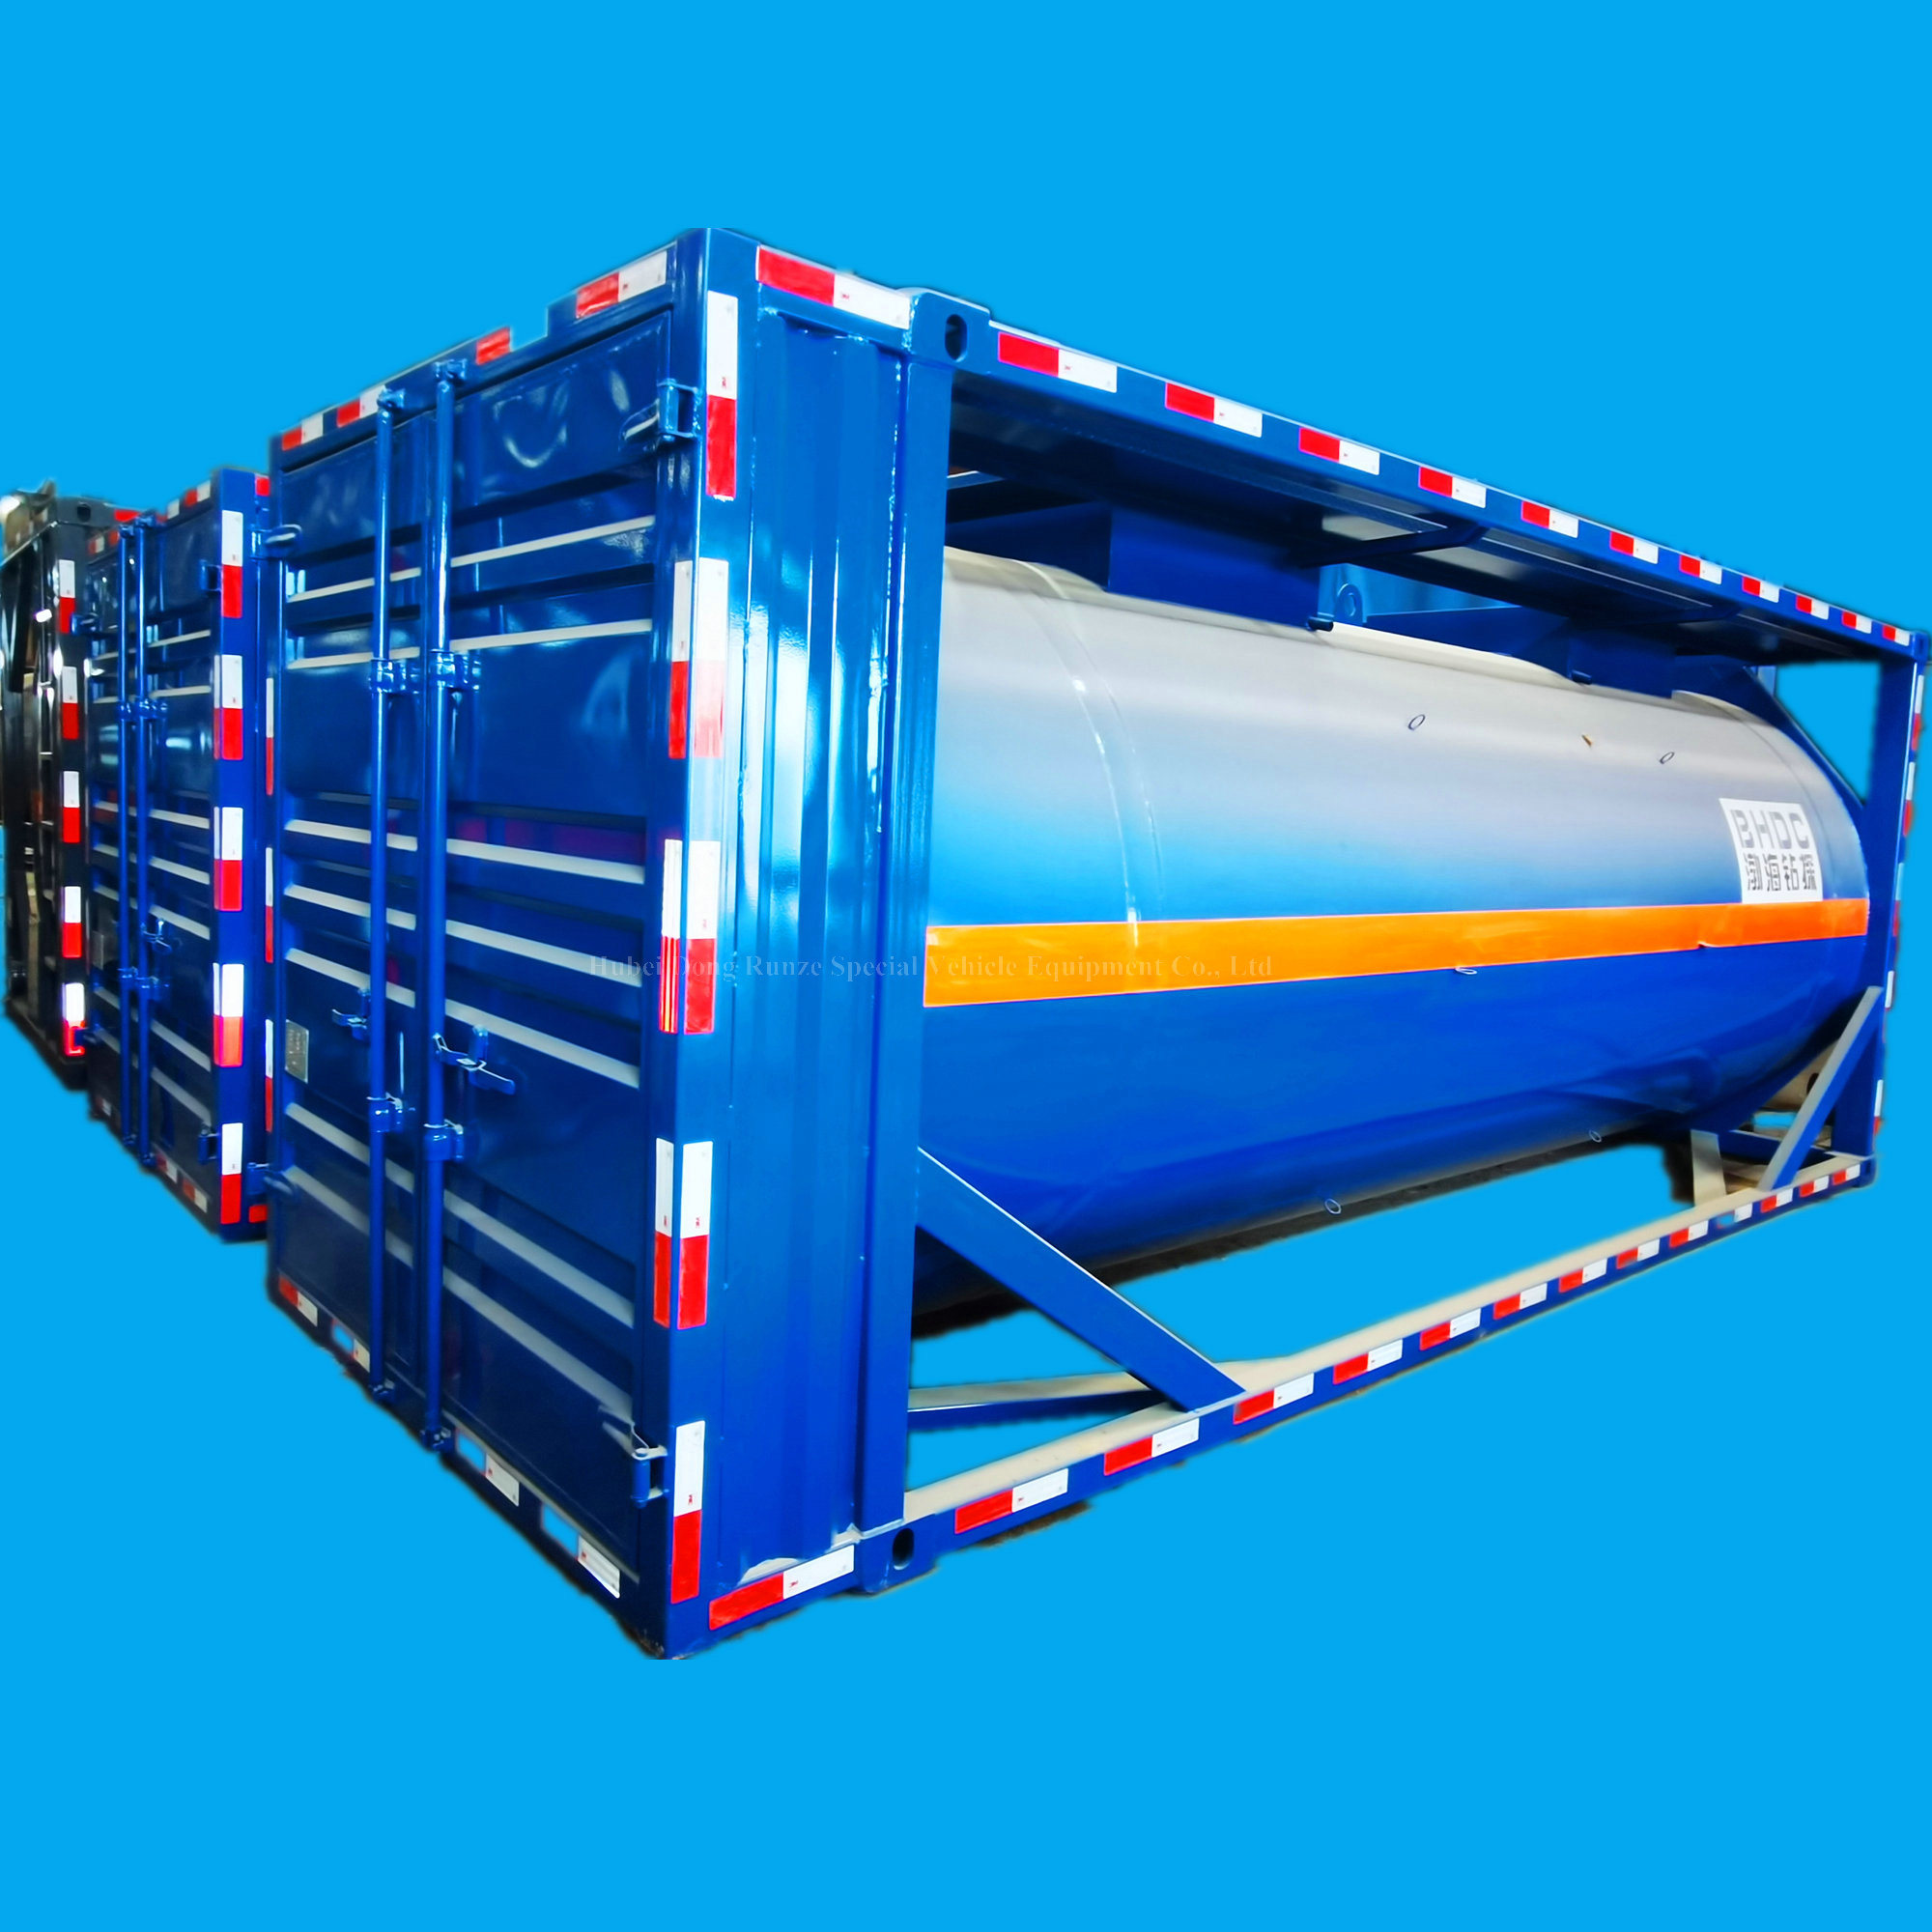 20FT SS30408 Stainless Steel Tank Container for Waste Oil and Water, Liquid Sludge, Drilling Waste Liquid 